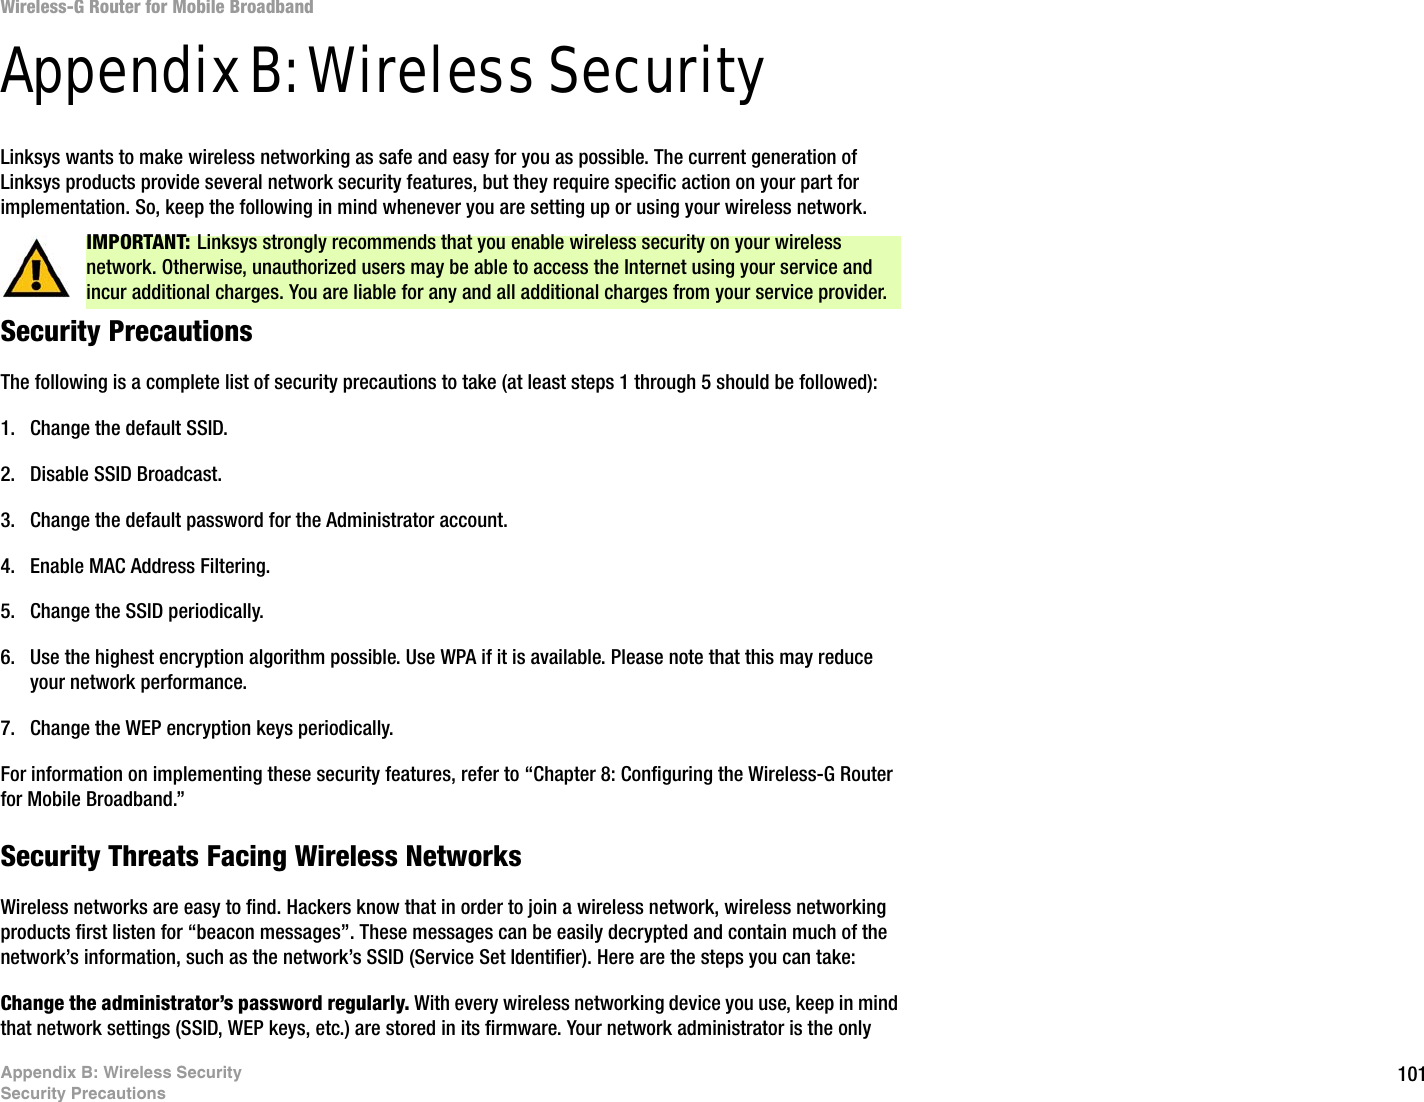 101Appendix B: Wireless SecuritySecurity PrecautionsWireless-G Router for Mobile BroadbandAppendix B: Wireless SecurityLinksys wants to make wireless networking as safe and easy for you as possible. The current generation of Linksys products provide several network security features, but they require specific action on your part for implementation. So, keep the following in mind whenever you are setting up or using your wireless network.Security PrecautionsThe following is a complete list of security precautions to take (at least steps 1 through 5 should be followed):1. Change the default SSID. 2. Disable SSID Broadcast. 3. Change the default password for the Administrator account. 4. Enable MAC Address Filtering. 5. Change the SSID periodically. 6. Use the highest encryption algorithm possible. Use WPA if it is available. Please note that this may reduce your network performance. 7. Change the WEP encryption keys periodically. For information on implementing these security features, refer to “Chapter 8: Configuring the Wireless-G Router for Mobile Broadband.”Security Threats Facing Wireless Networks Wireless networks are easy to find. Hackers know that in order to join a wireless network, wireless networking products first listen for “beacon messages”. These messages can be easily decrypted and contain much of the network’s information, such as the network’s SSID (Service Set Identifier). Here are the steps you can take:Change the administrator’s password regularly. With every wireless networking device you use, keep in mind that network settings (SSID, WEP keys, etc.) are stored in its firmware. Your network administrator is the only IMPORTANT: Linksys strongly recommends that you enable wireless security on your wireless network. Otherwise, unauthorized users may be able to access the Internet using your service and incur additional charges. You are liable for any and all additional charges from your service provider.